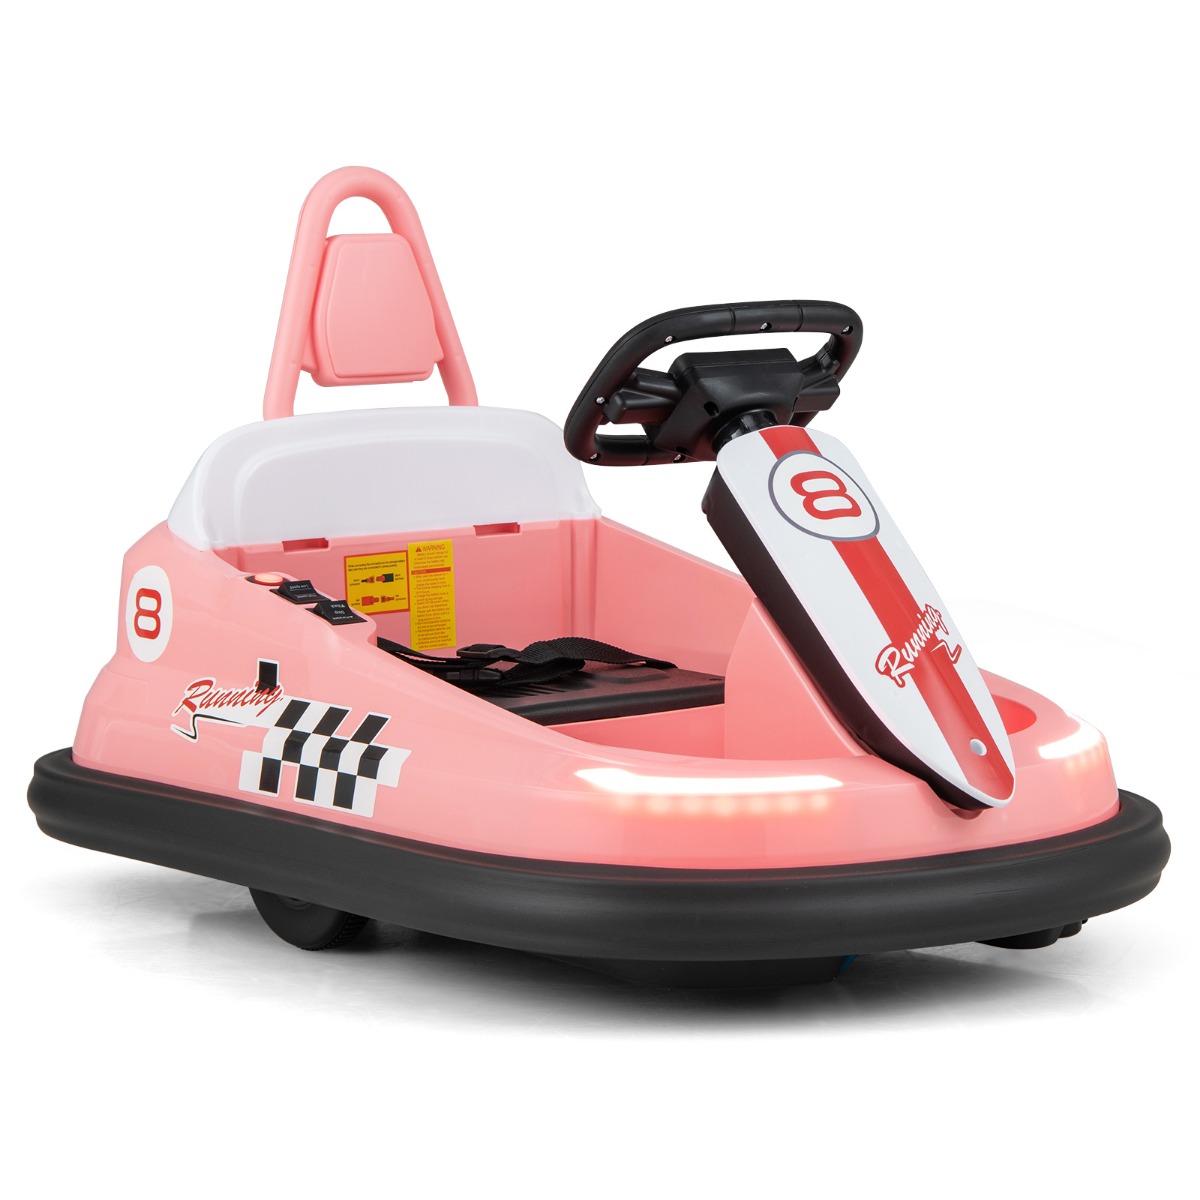 Electric kids Ride-on Bumper Car with 360° Spinning and Dual Motors-Pink